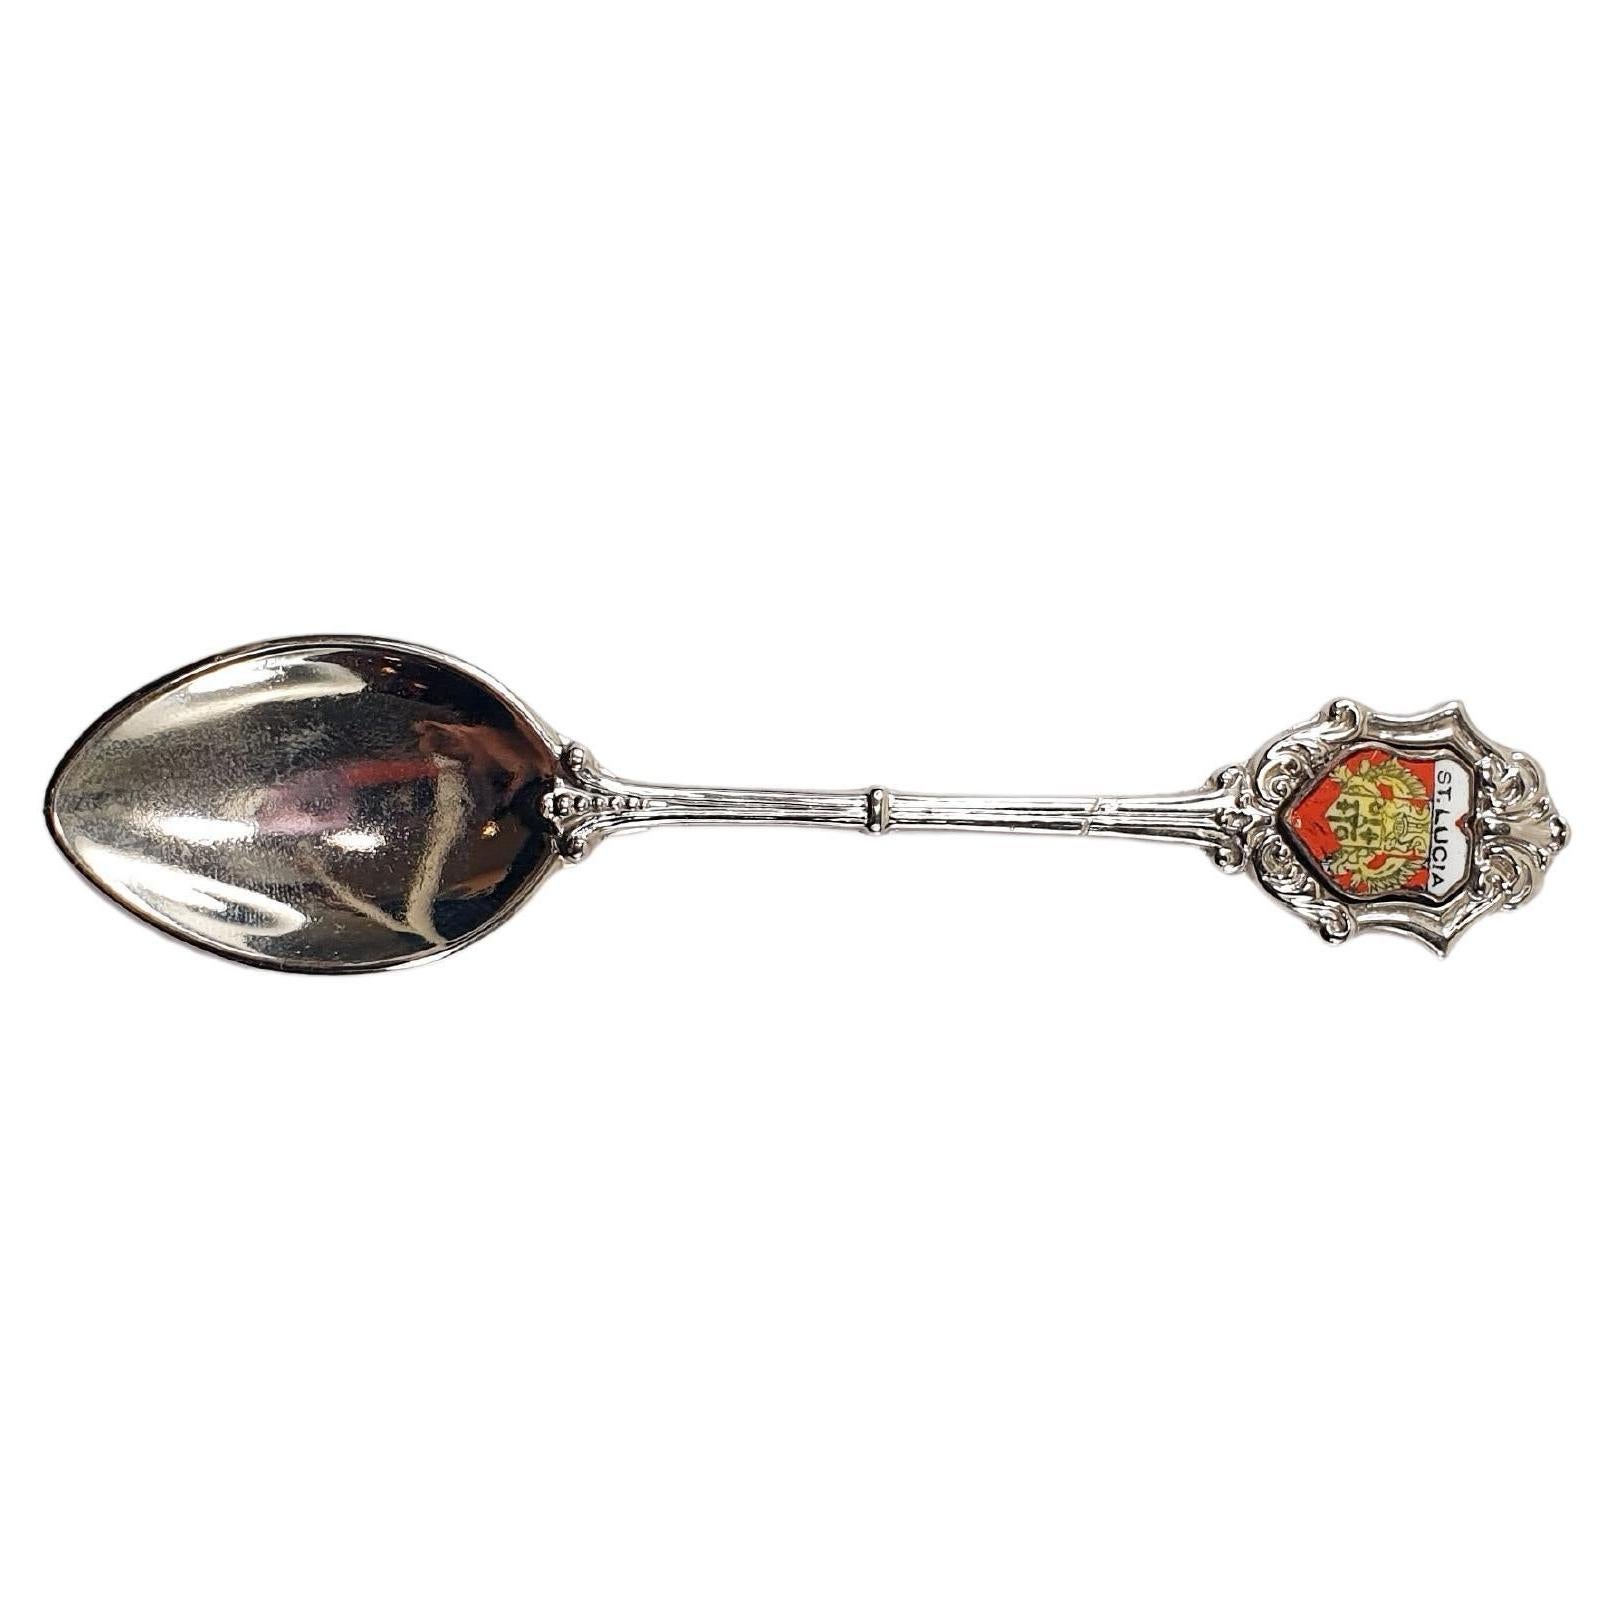 St Lucia Souvenir Collection Silver Teaspoon
Length 4.37in / 11.1cm
Width 0.90in / 2.5cm
Weight 15.1gr

PRADERA is a  second generation of a family run business jewelers of reference in Spain, with a large track record  being official distributers